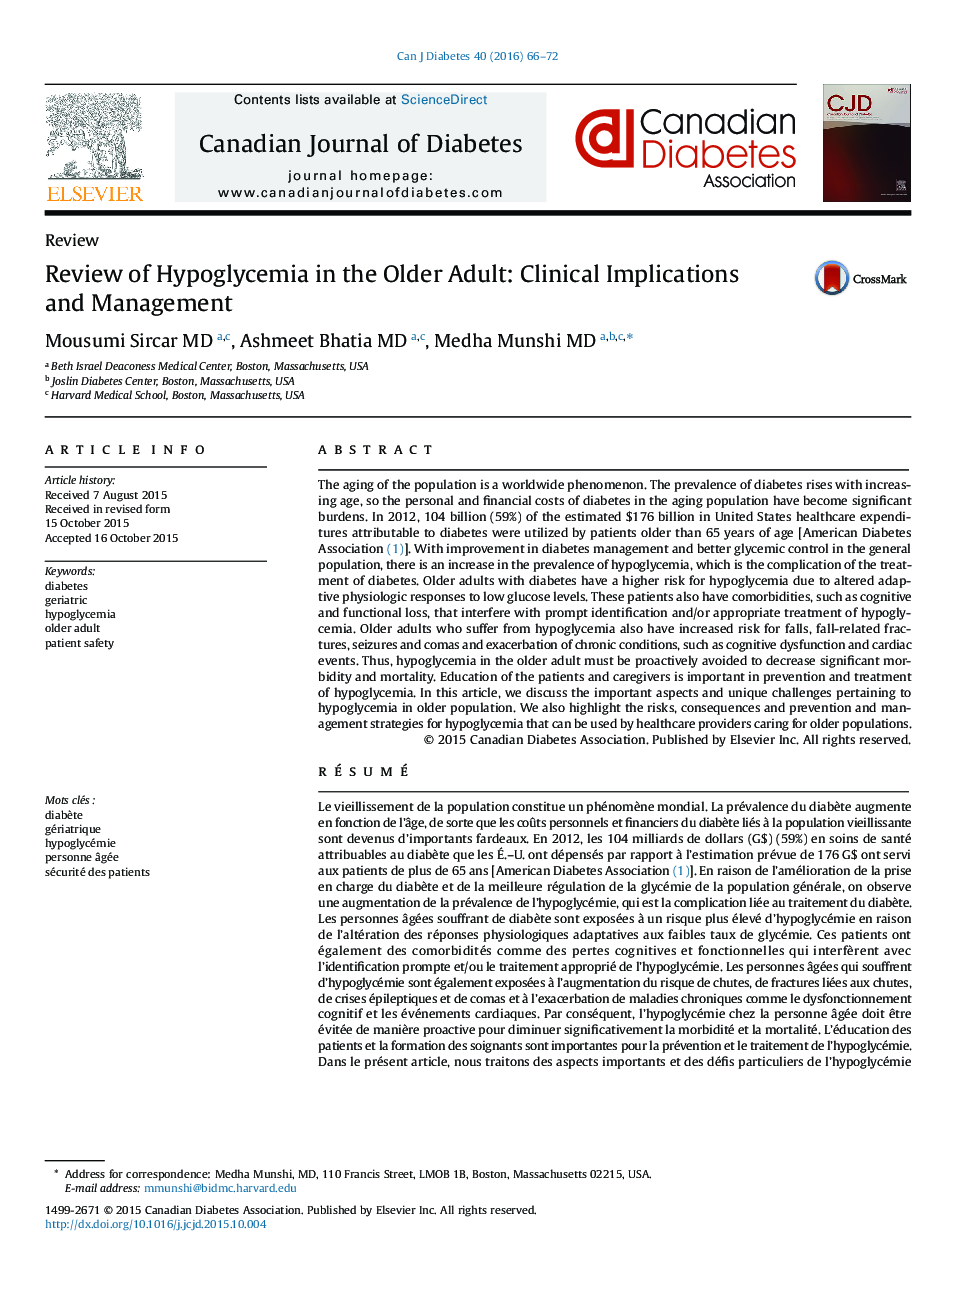 Review of Hypoglycemia in the Older Adult: Clinical Implications and Management